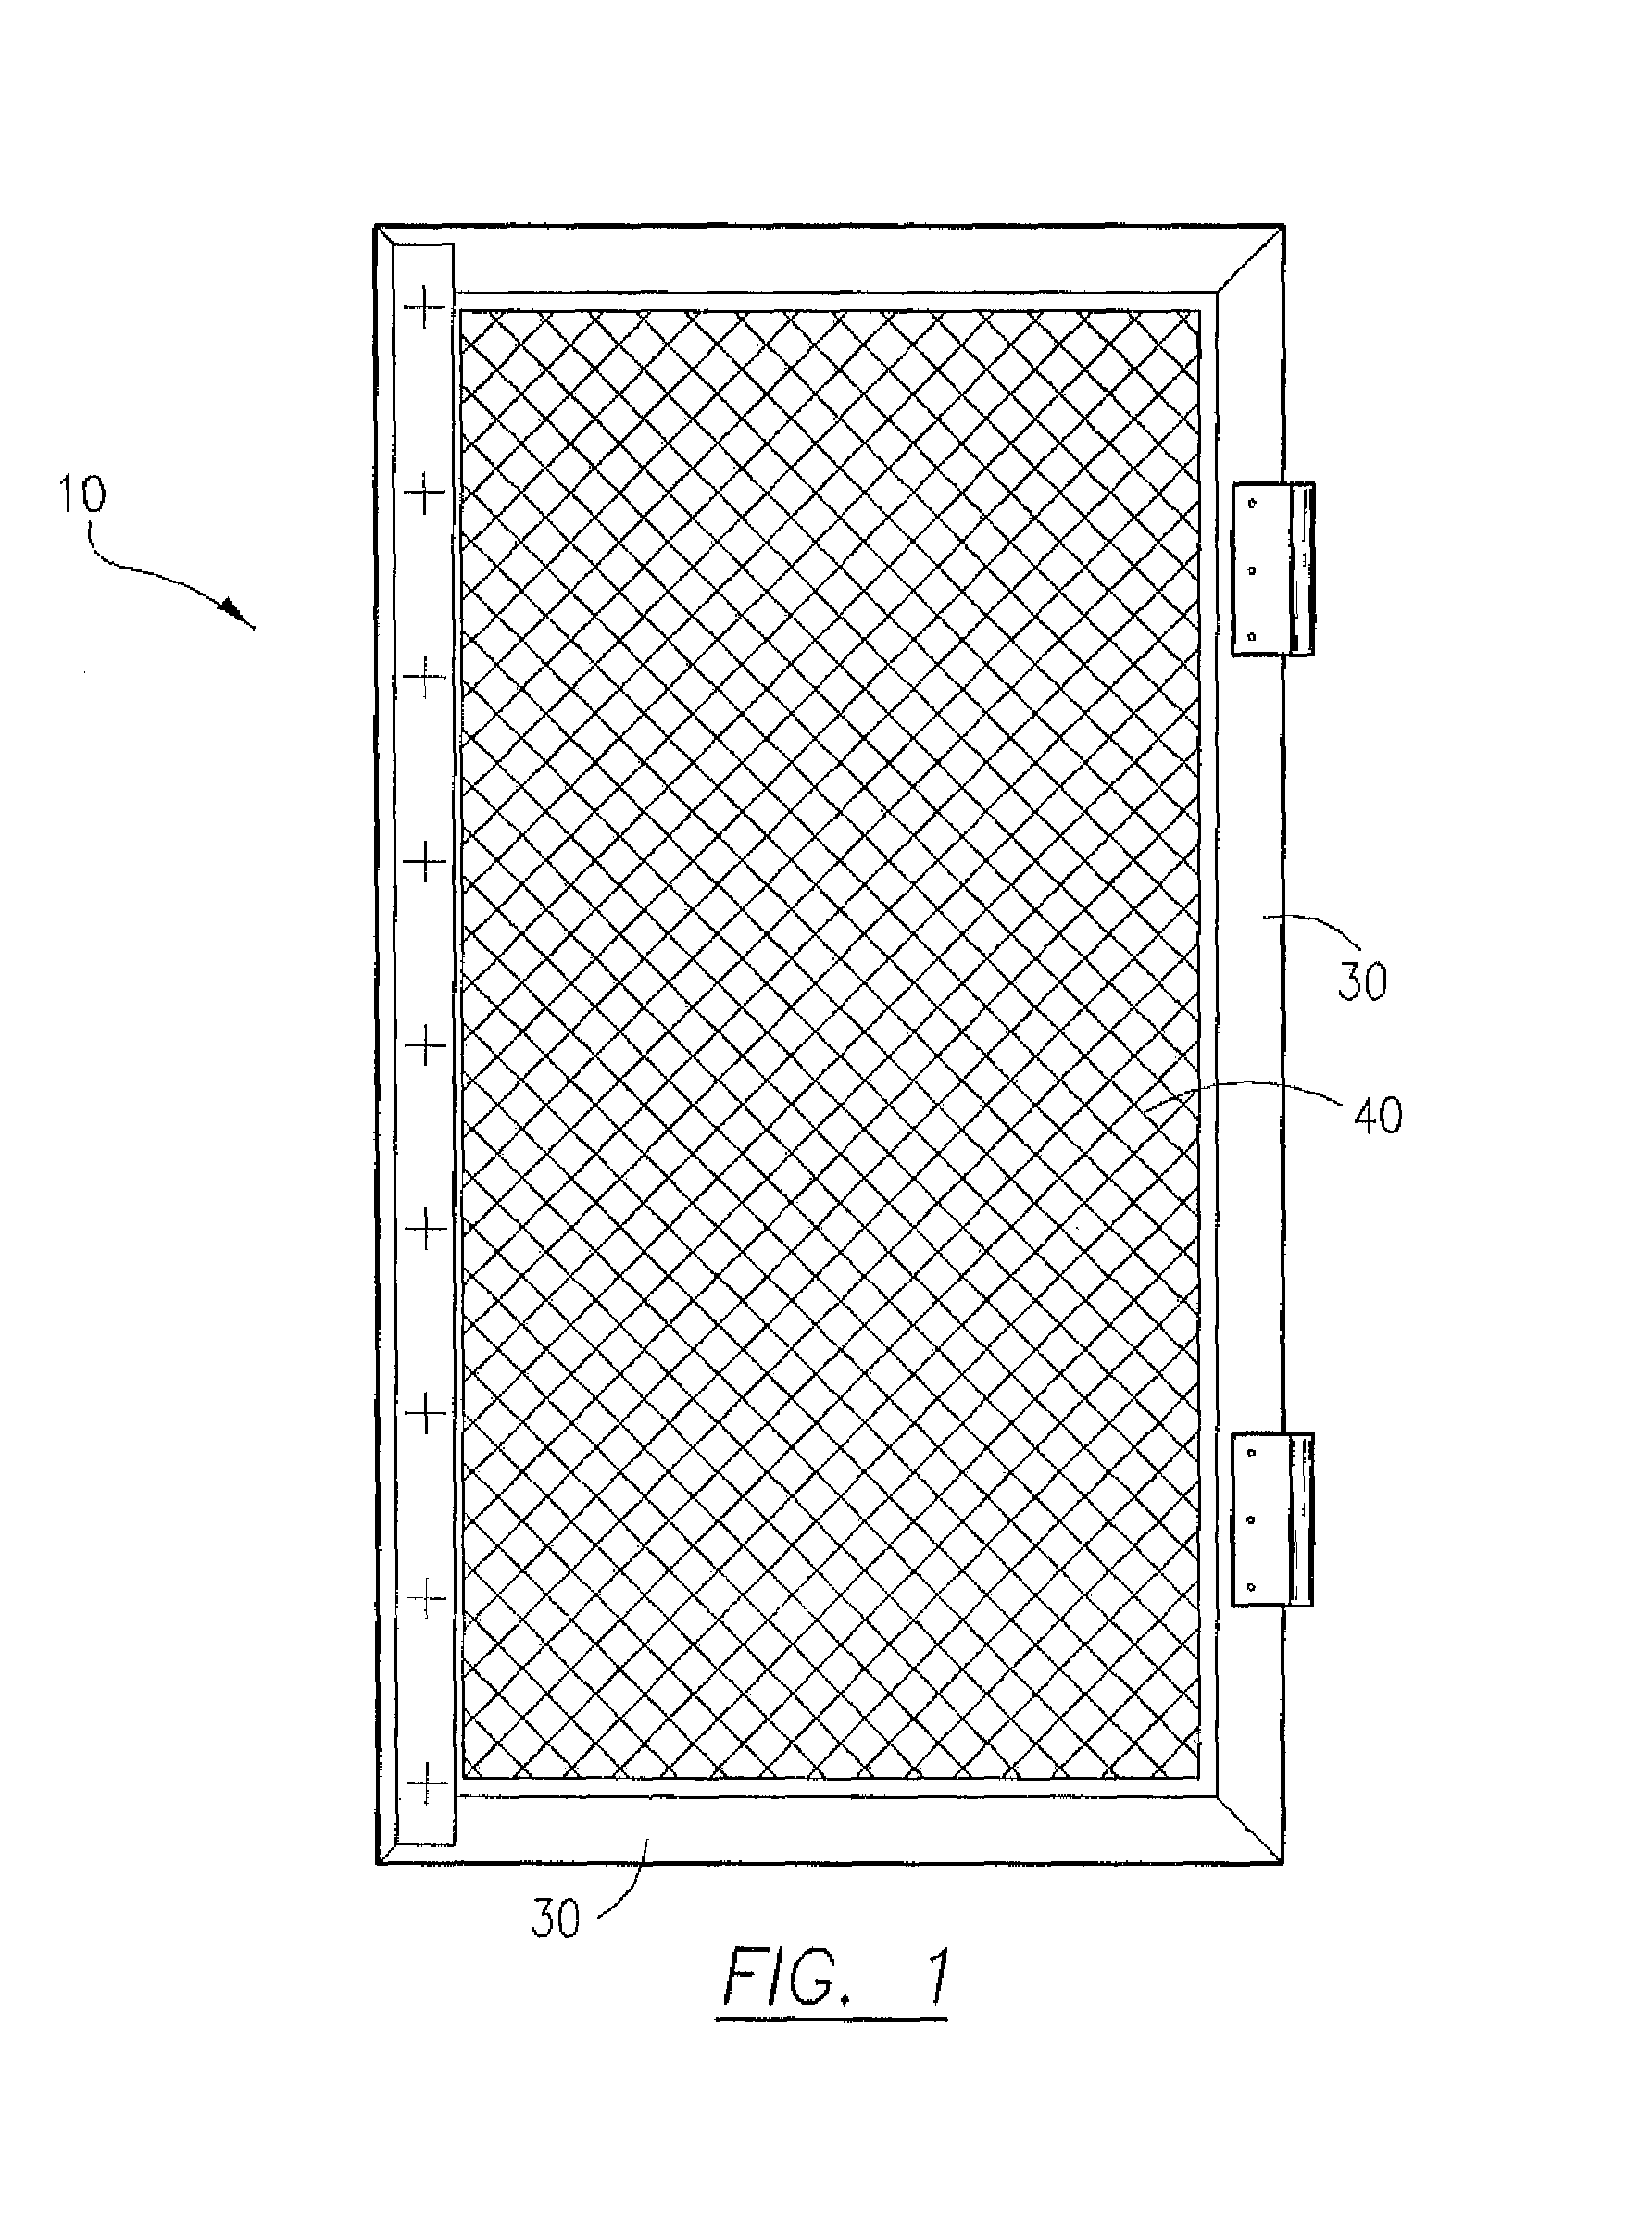 Screen-type storm barrier and wind abatement system